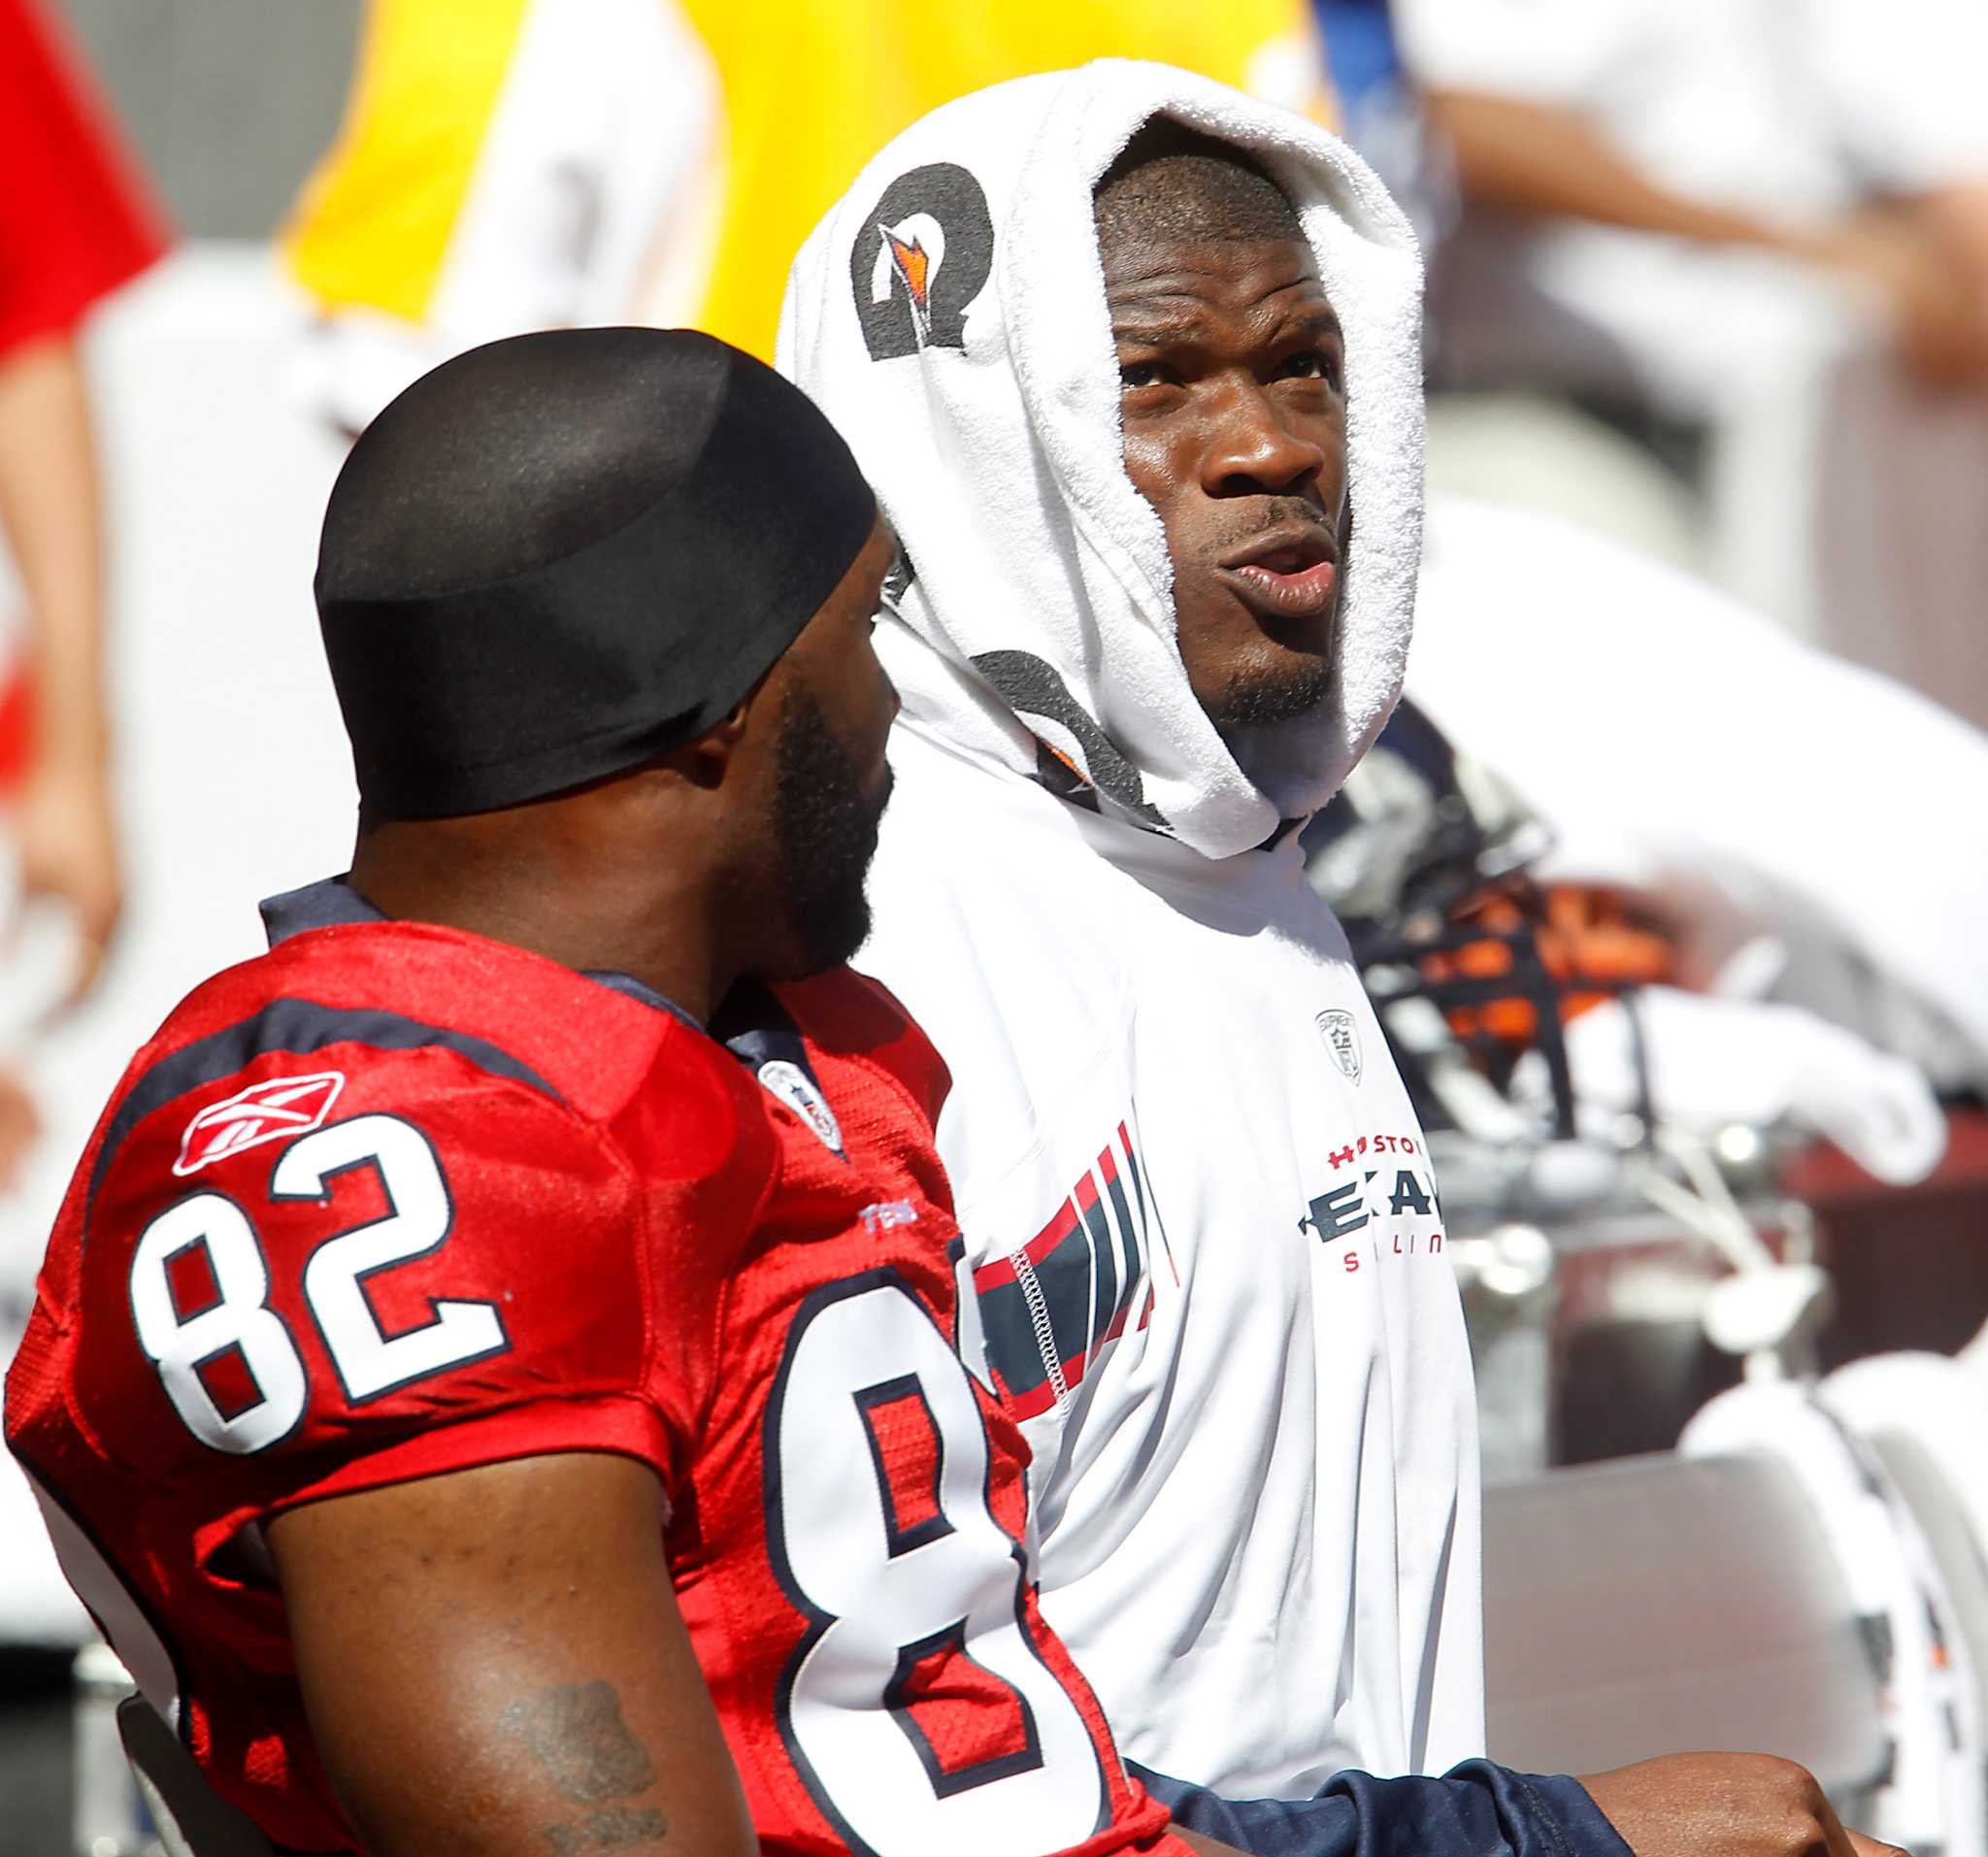 Andre Johnson almost pulled out of Texans' Ring of Honor ceremony over  McNair comments - NBC Sports